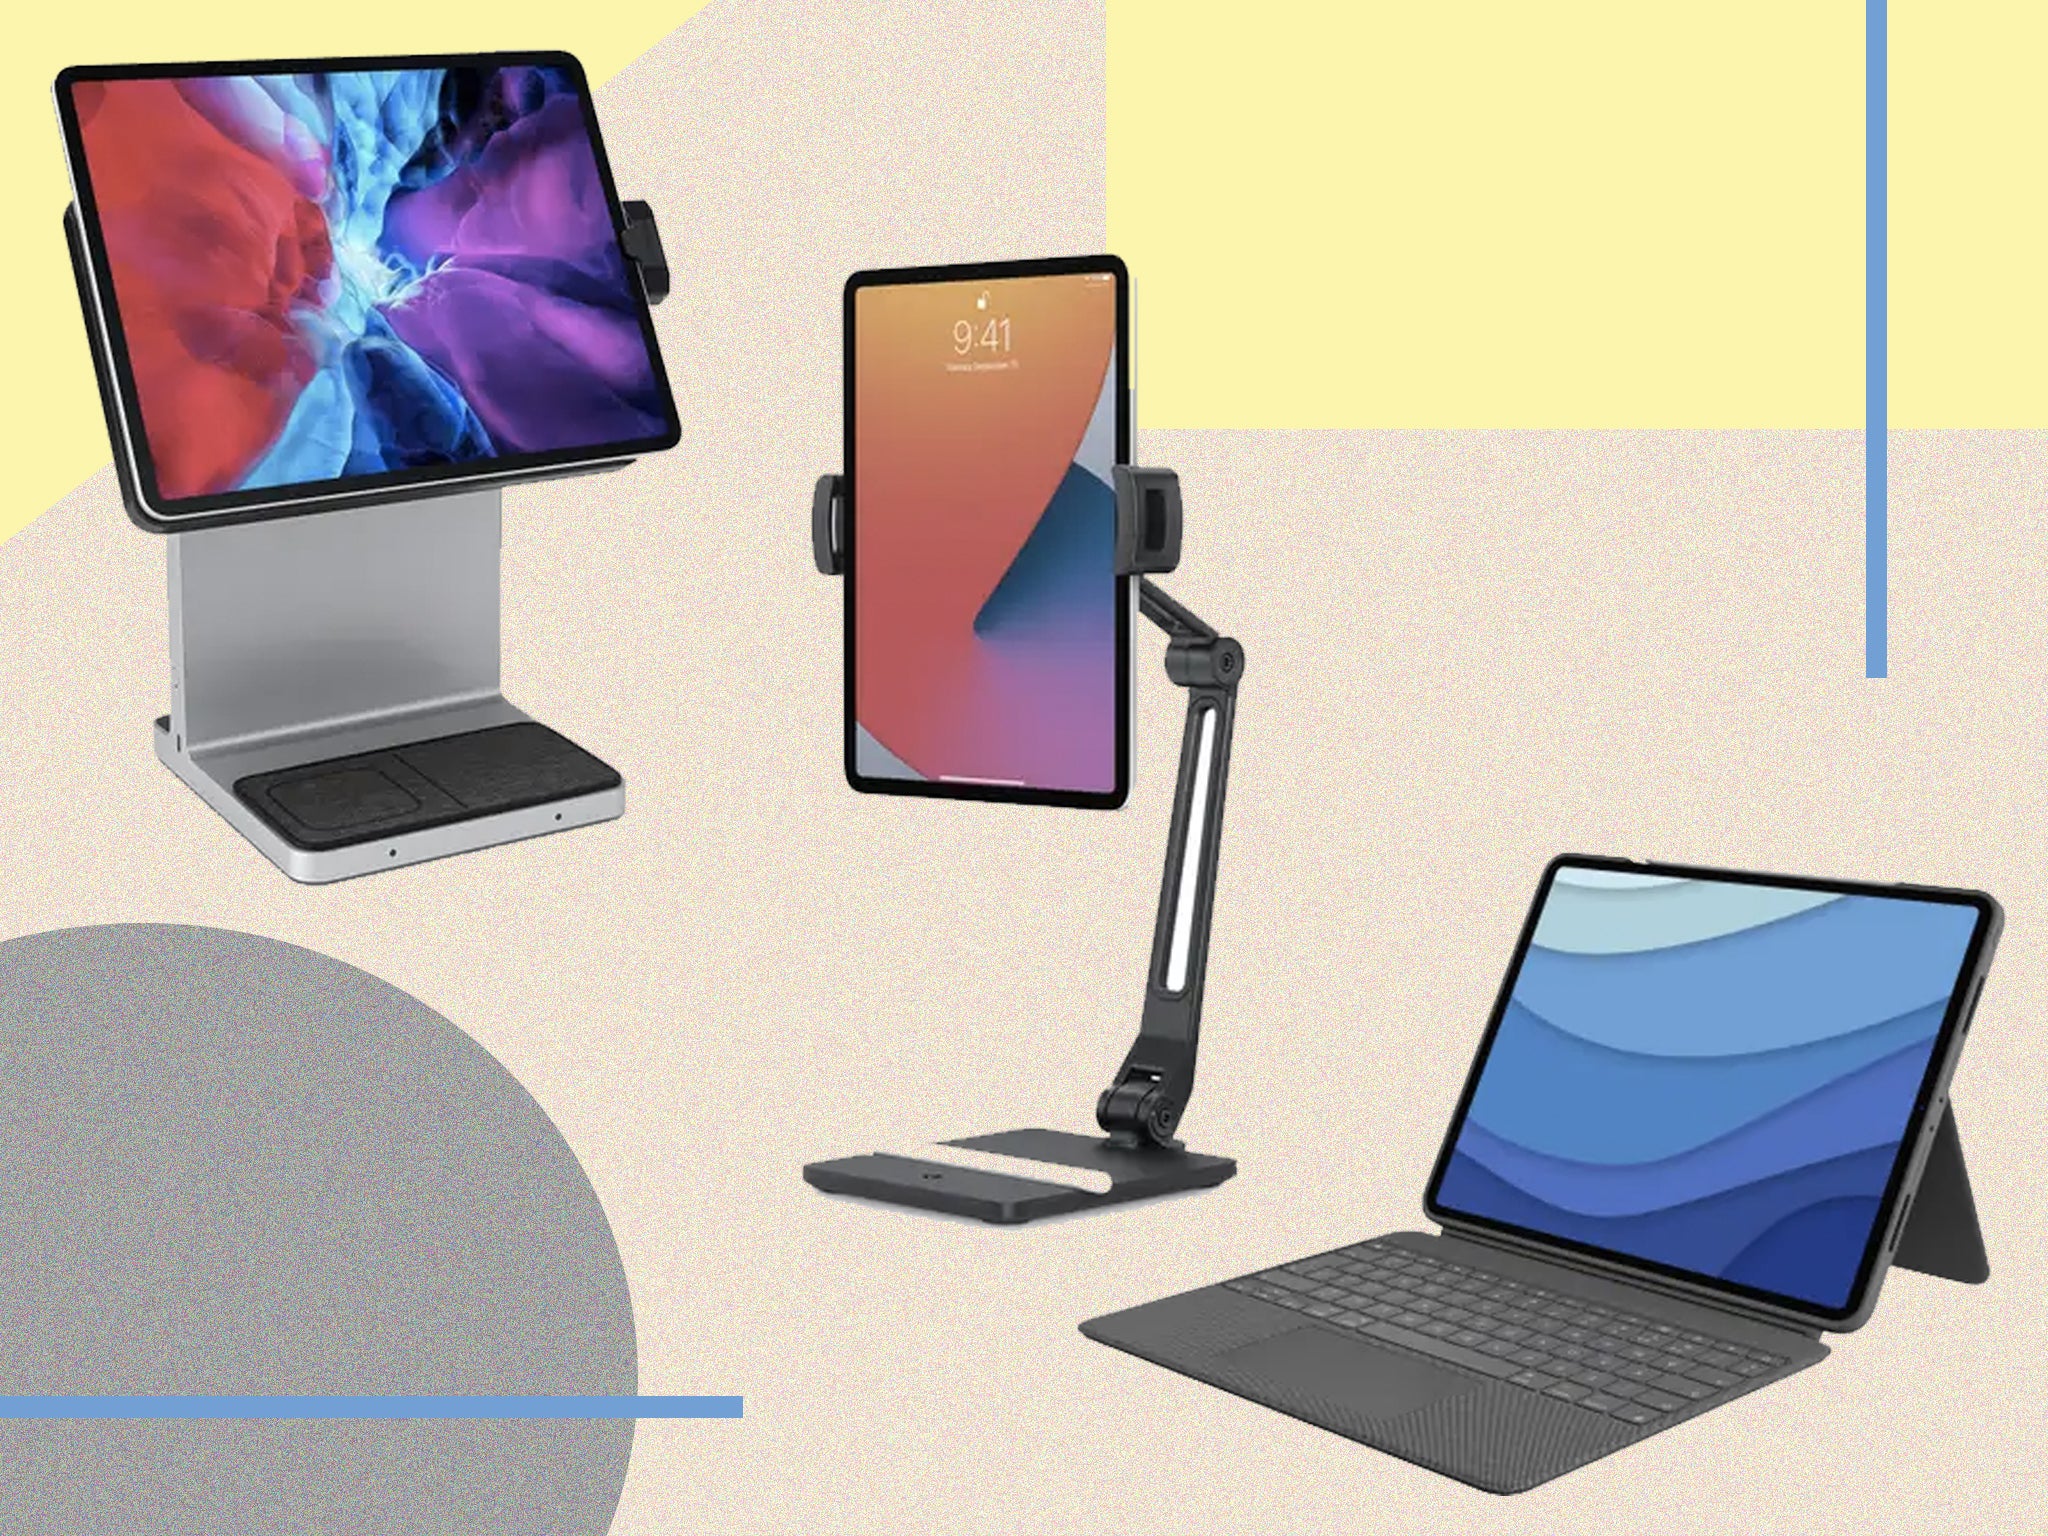 <p>We tested these tablet holders on both our home desk and in our office setup</p>